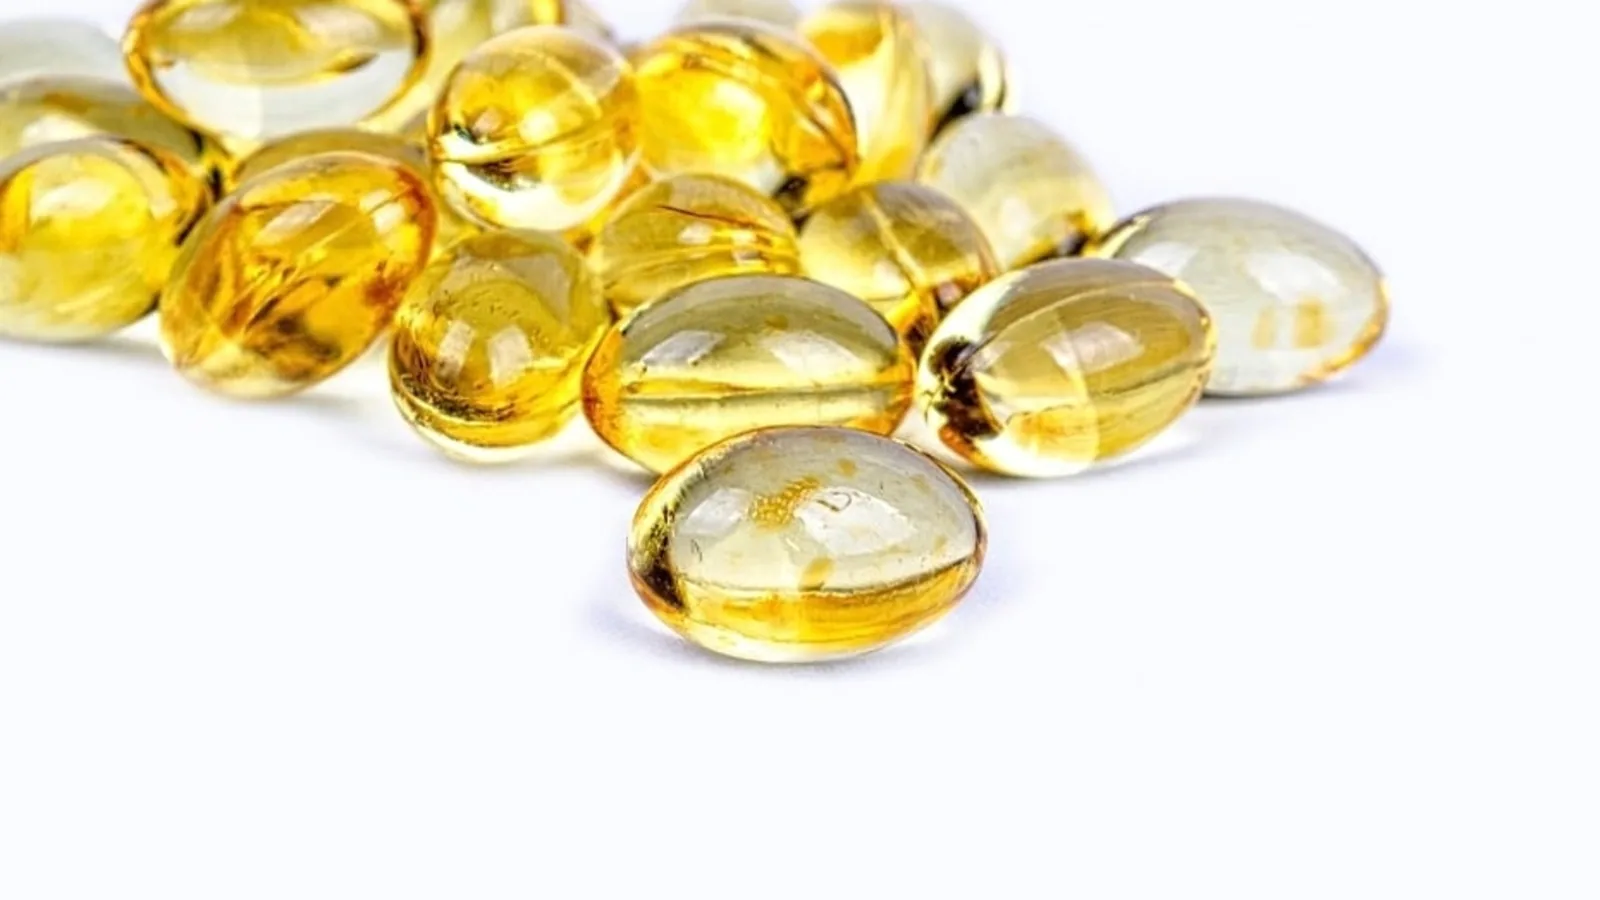 Vitamin D2 may have adverse effects; vitamin D3 can fight infections: Study